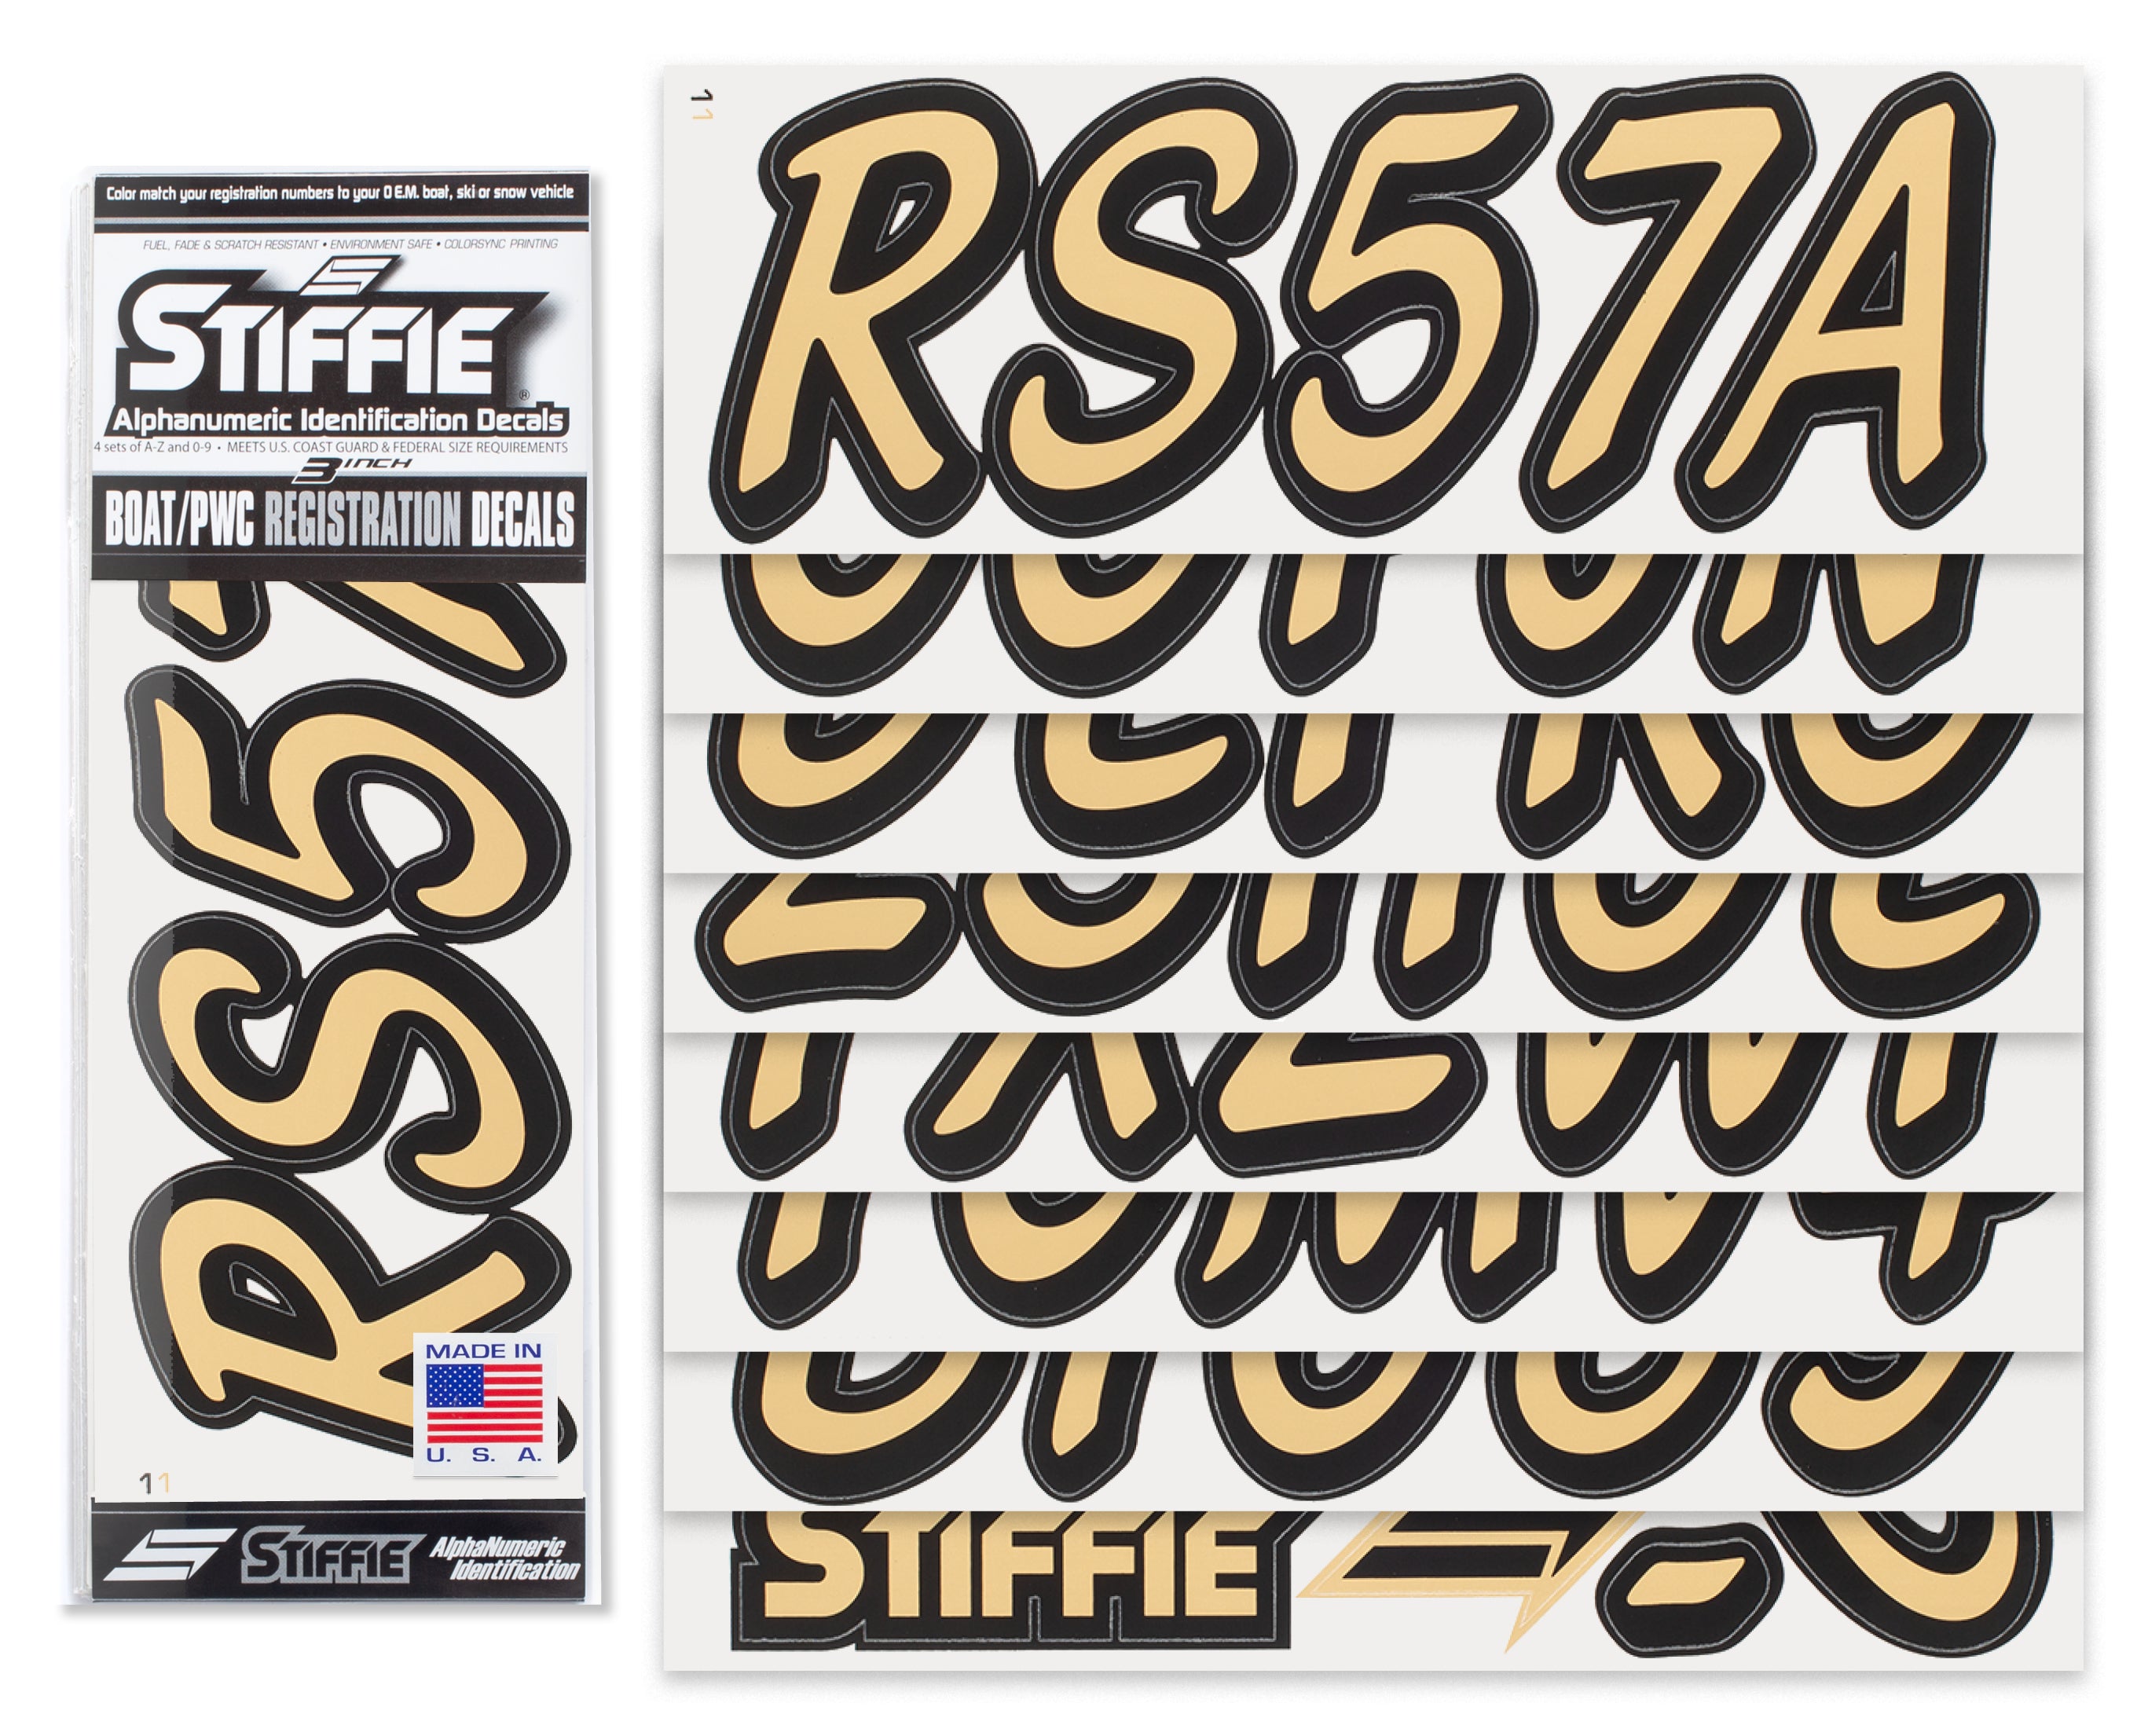 STIFFIE Whipline Solid Tan/Black 3" Alpha-Numeric Registration Identification Numbers Stickers Decals for Boats & Personal Watercraft